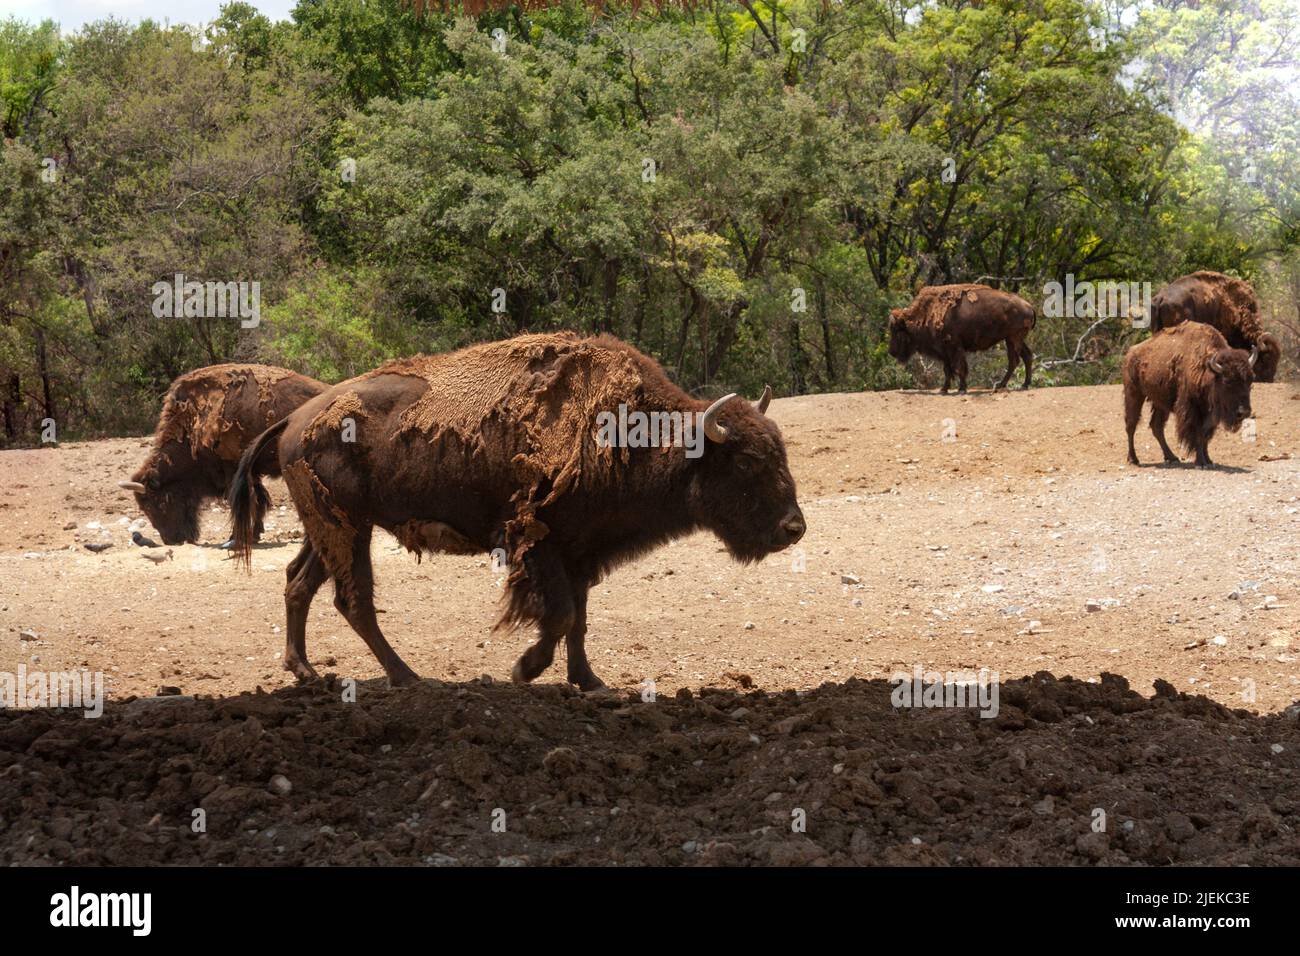 American bison scientific name Bison bison herd mammal standing in with hooves and horns basking in the sun on prairie Stock Photo